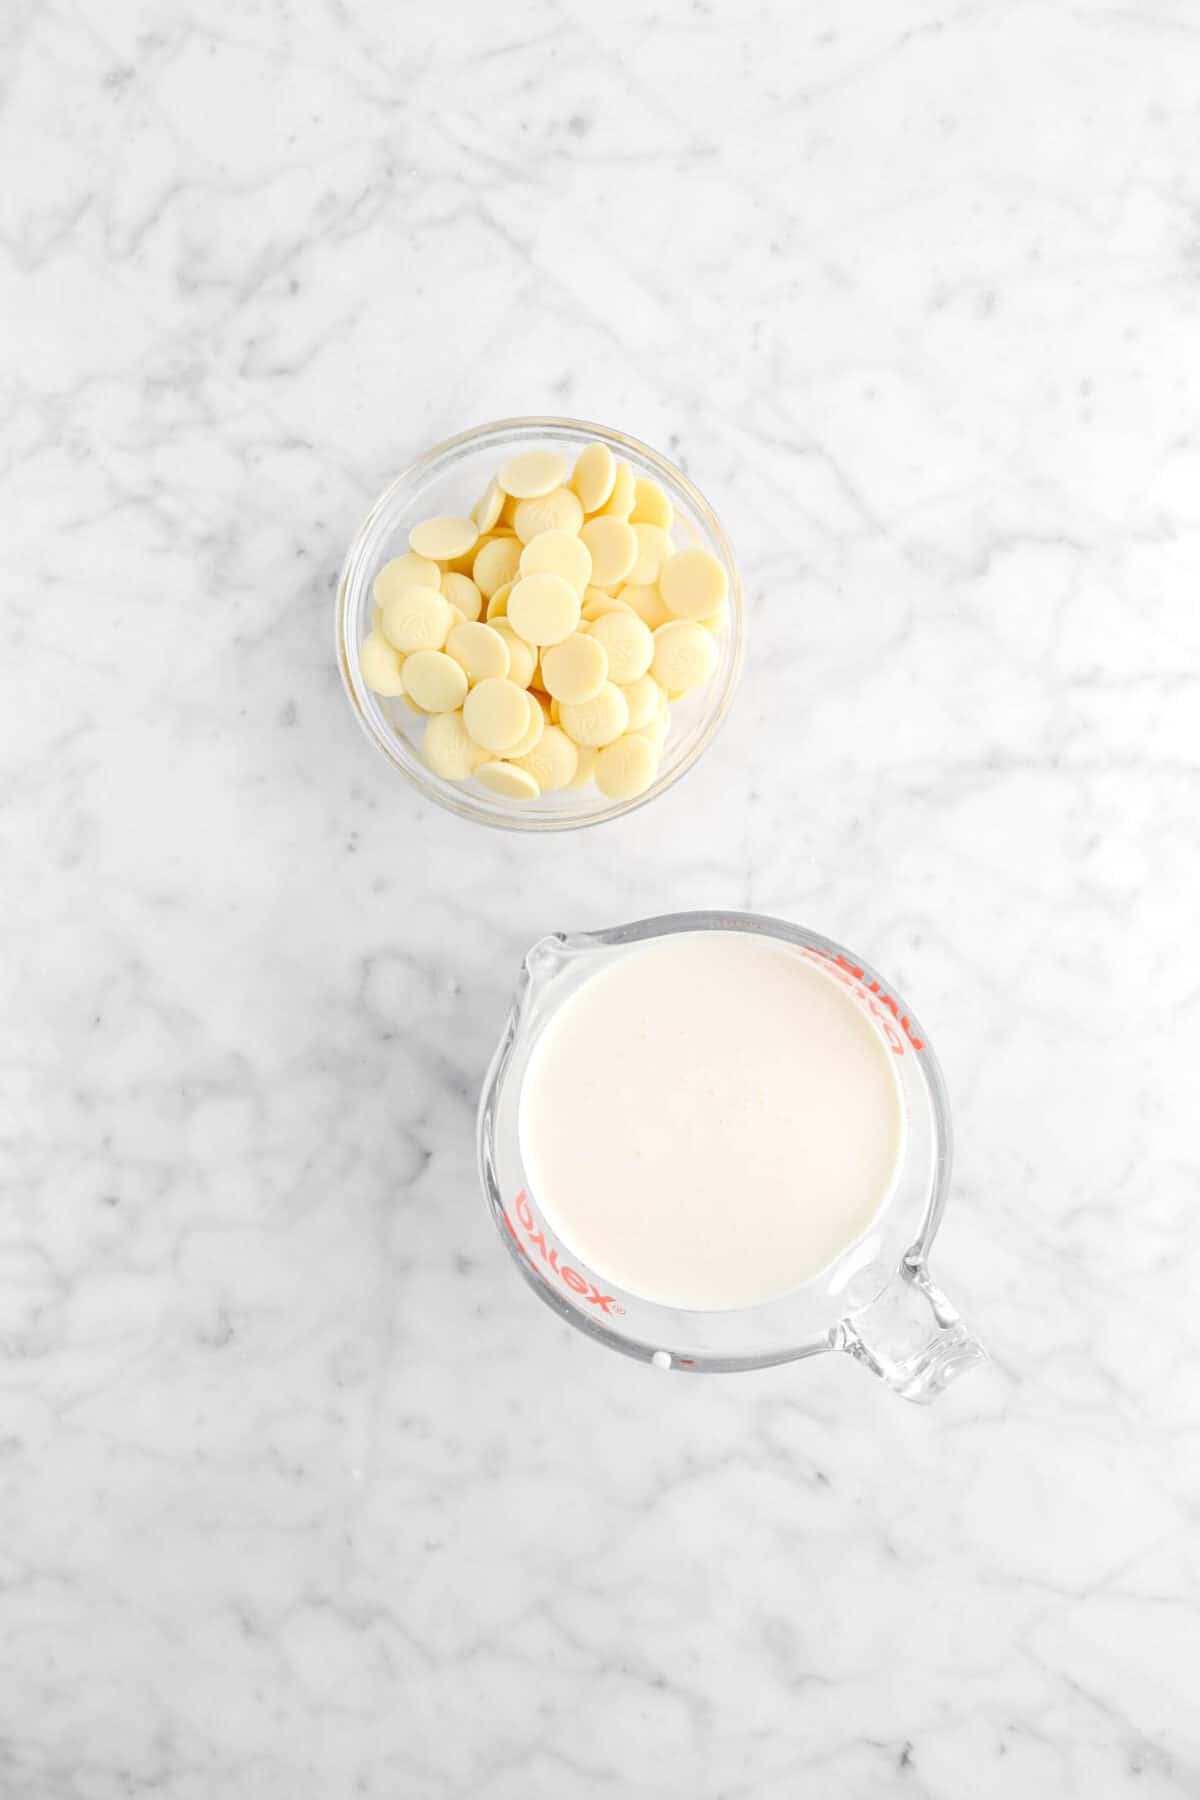 white chocolate and heavy cream on marble counter